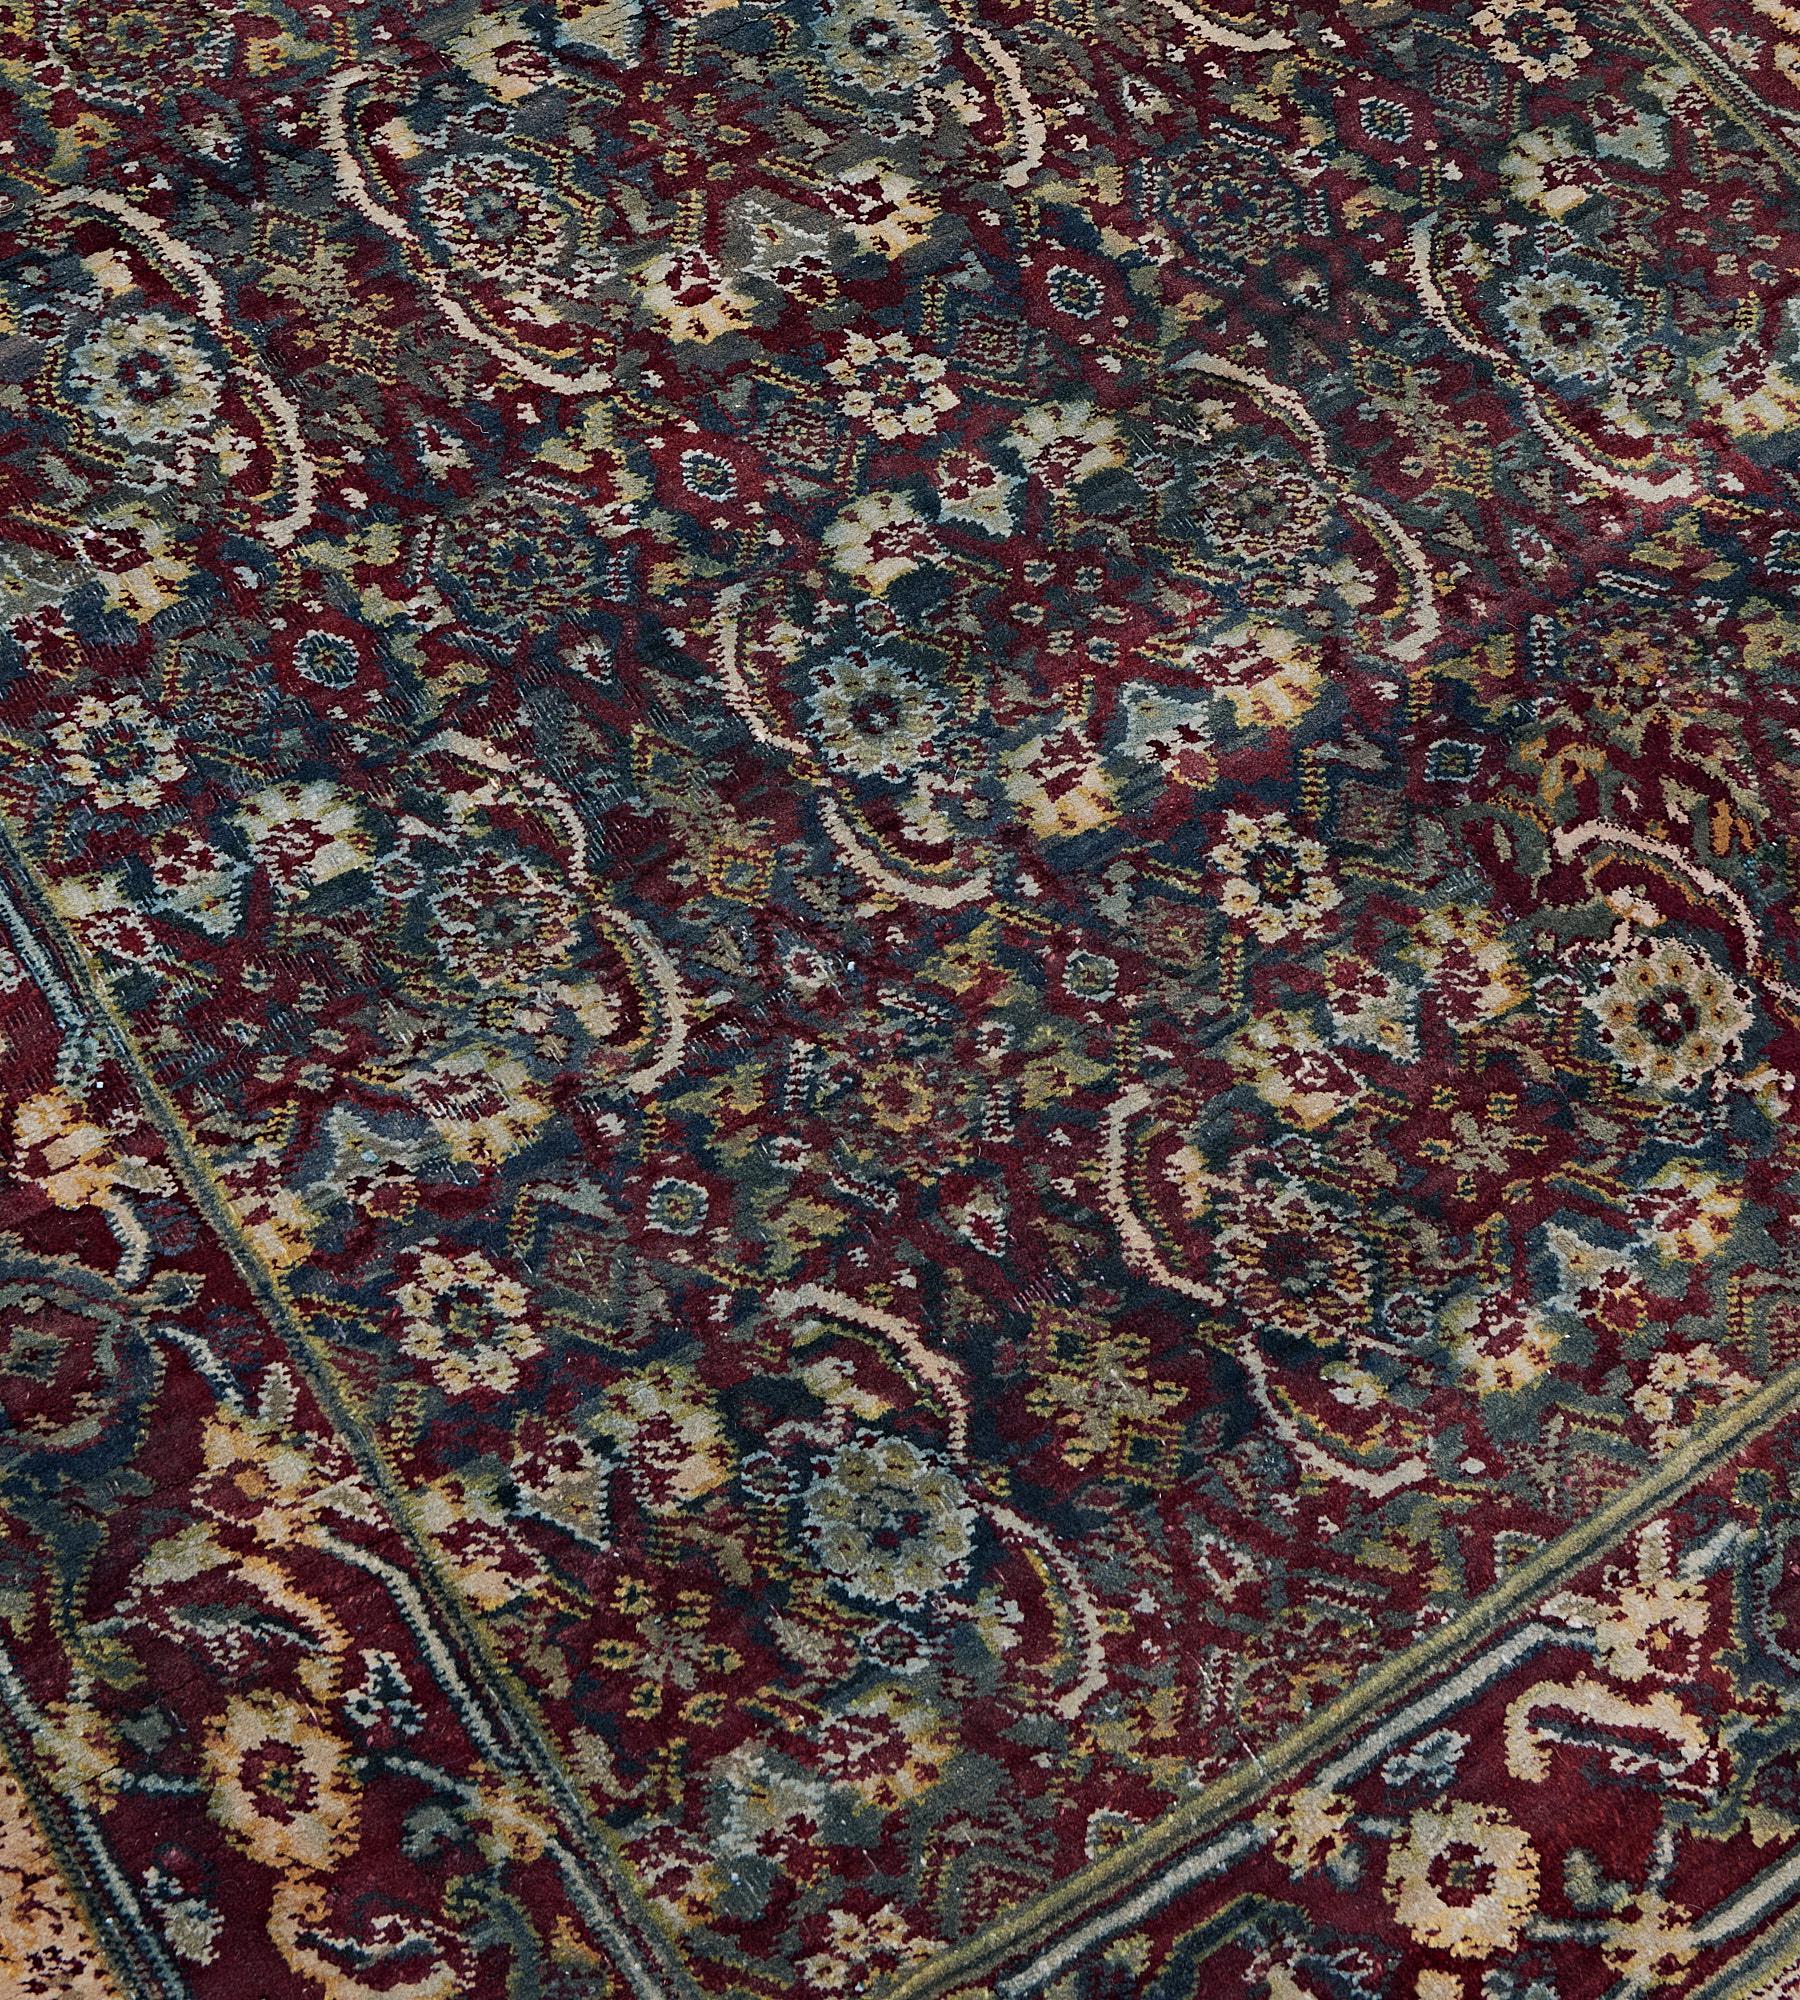 This antique, late 19th century, Agra runner has a shaded sea-blue field with an overall burgundy-red, ivory and sea-green herati-pattern, in a burgundy-red border of ivory and shaded blue meandering flowerhead vine between shaded green and blue